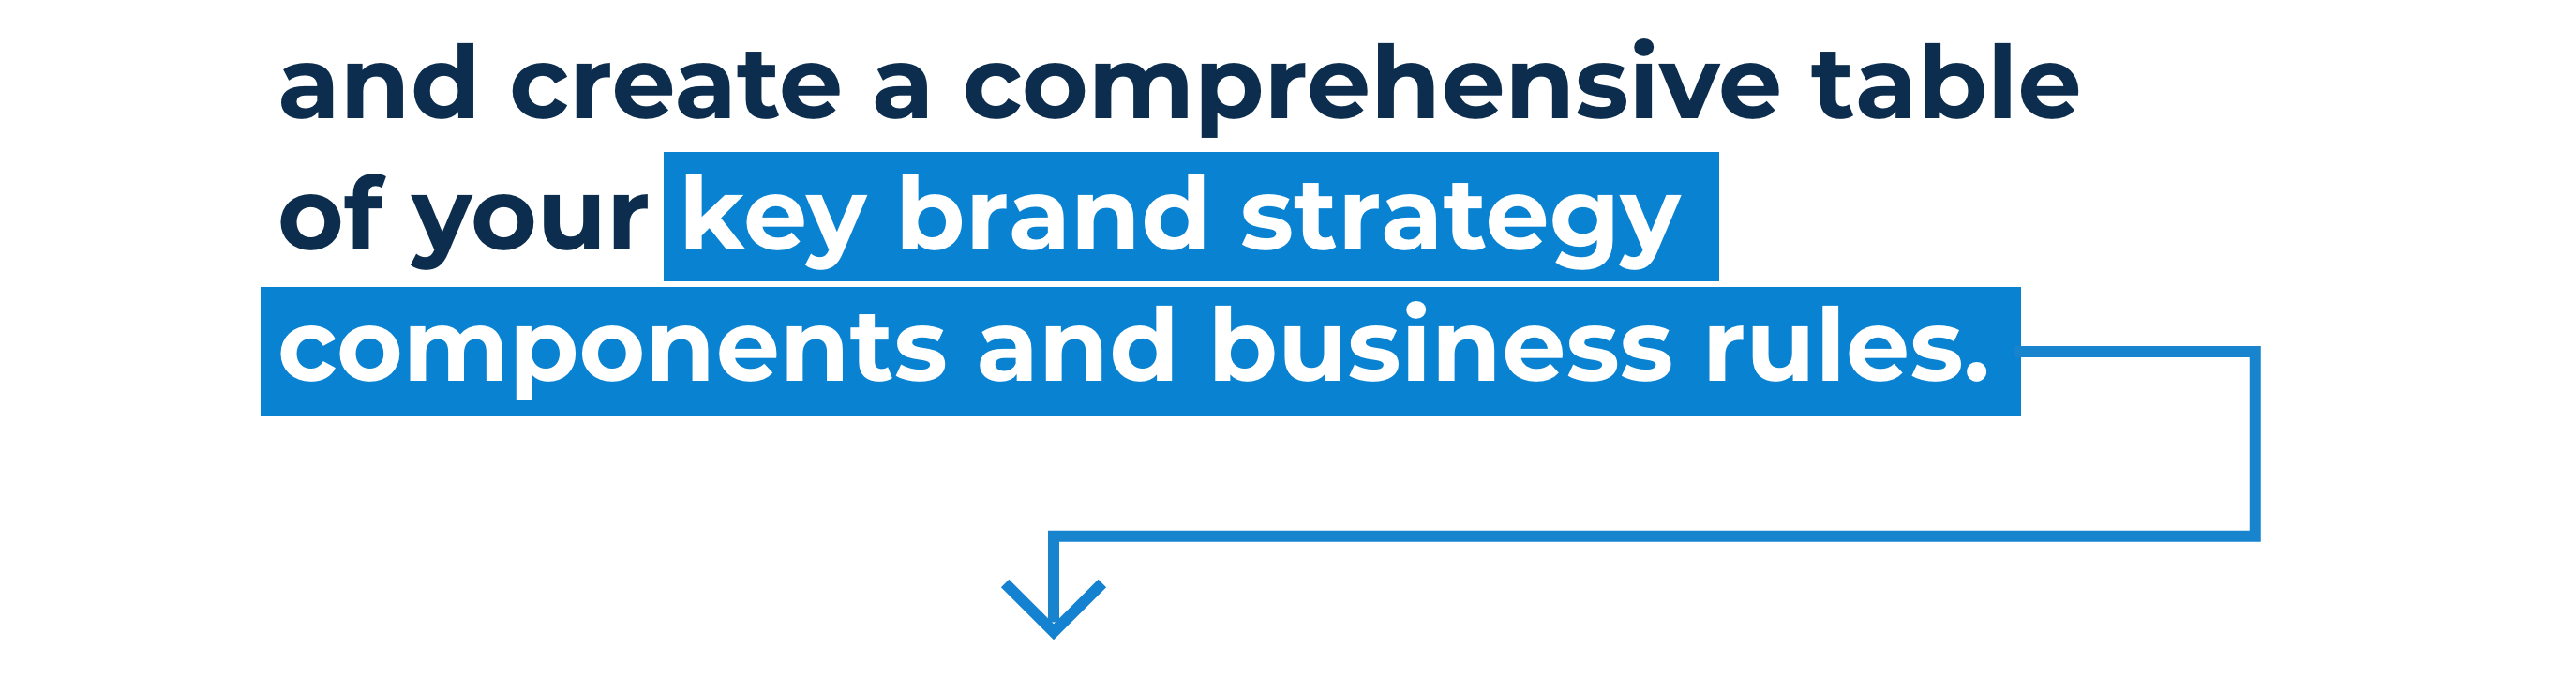 and create a comprehensive table of your key brand strategy components and business rules.